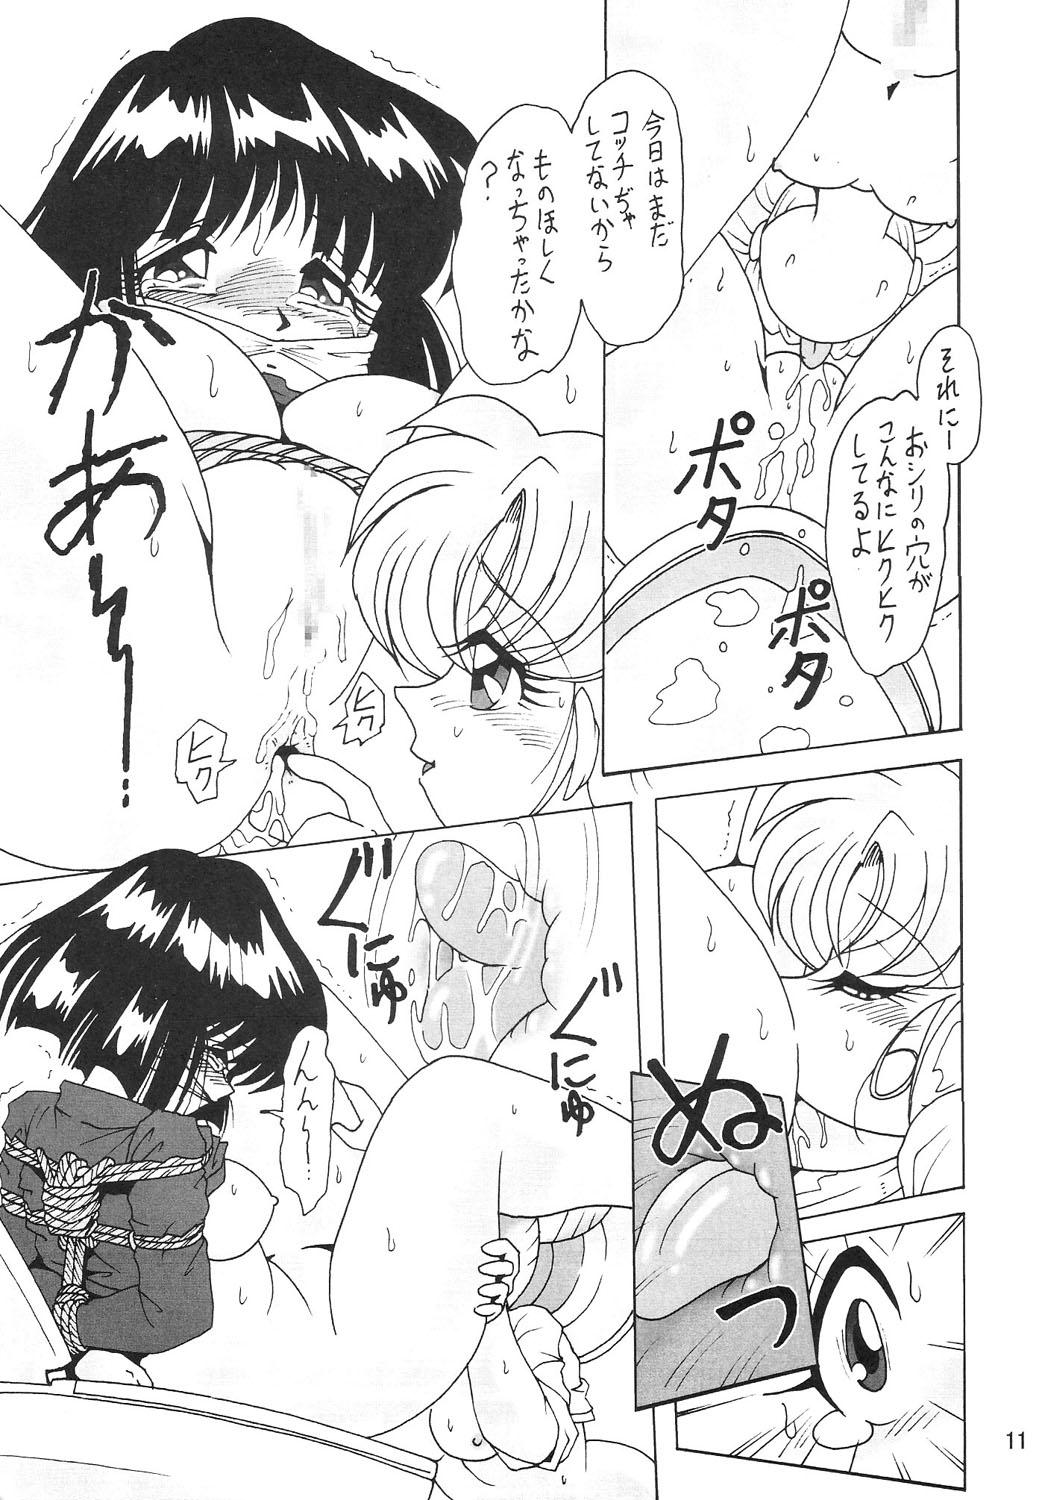 Playing Silent Saturn SS vol. 6 - Sailor moon Pussy Fingering - Page 11